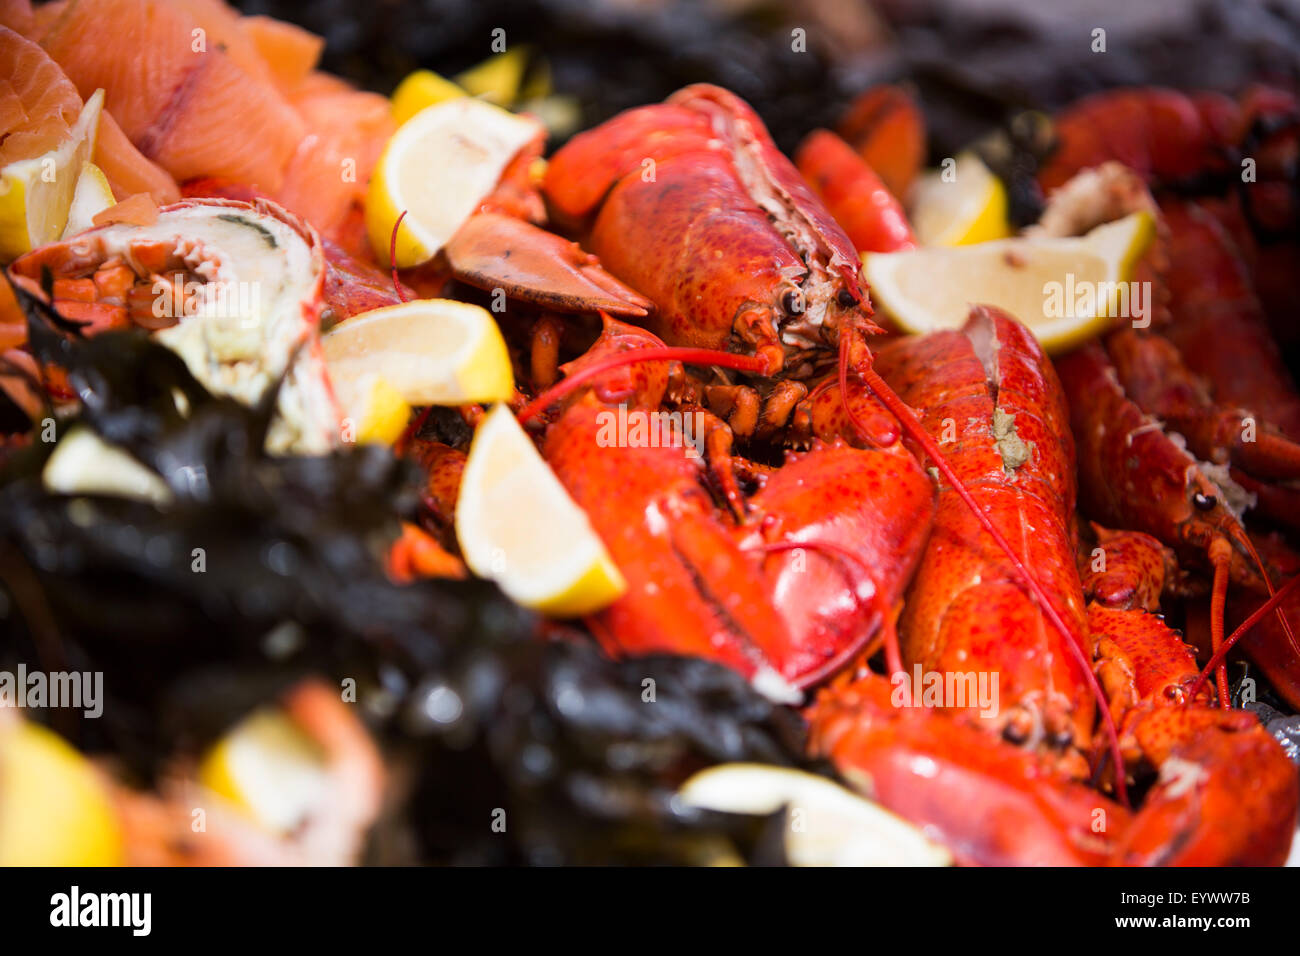 Detail of sea food platter - cooked lobster with lemon wedges and seaweed. Stock Photo